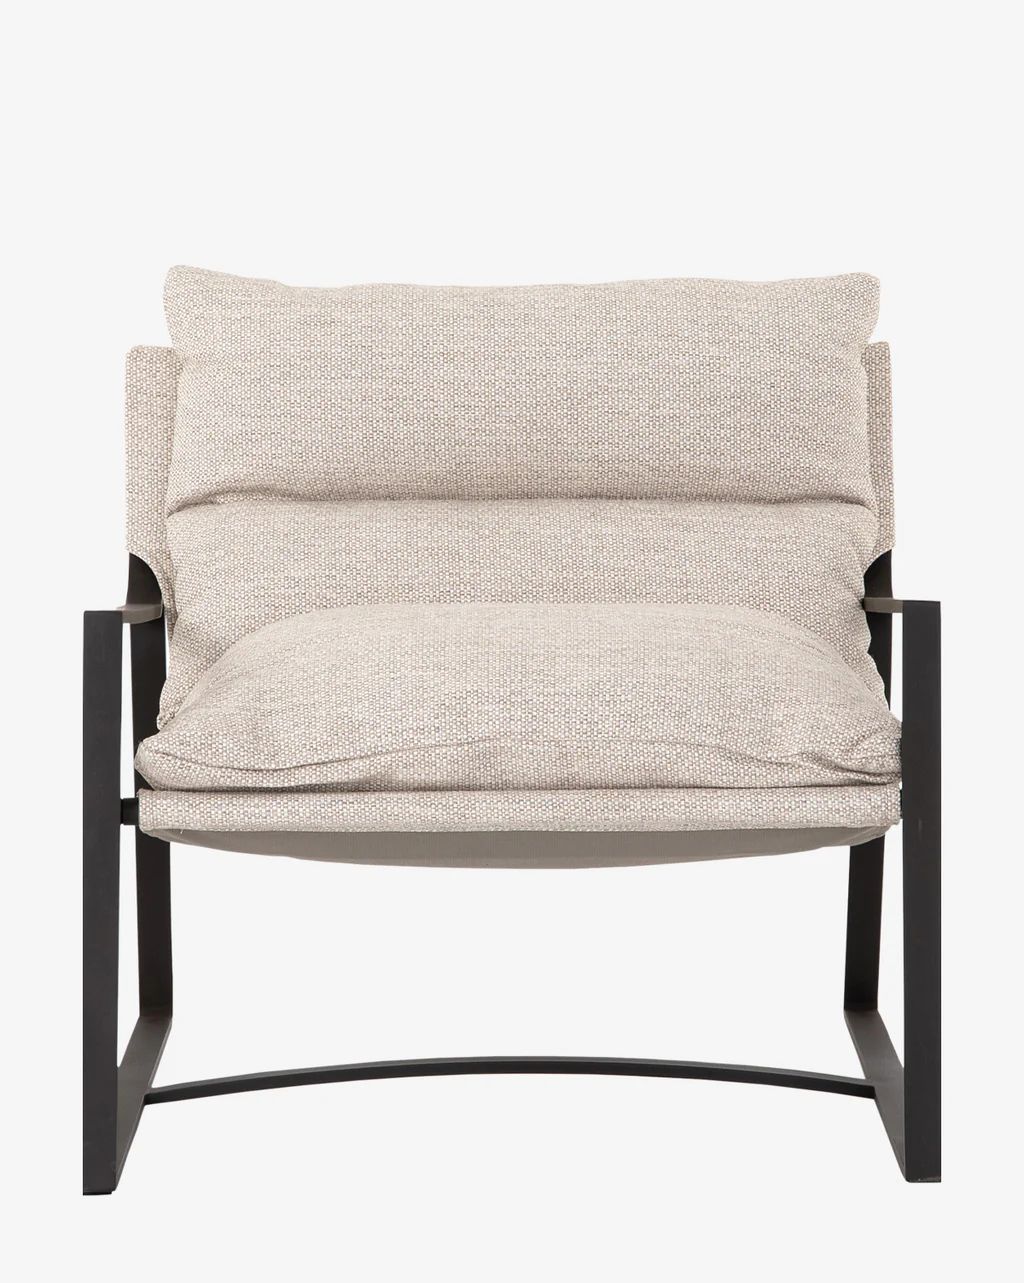 Ismay Sling Chair | McGee & Co.